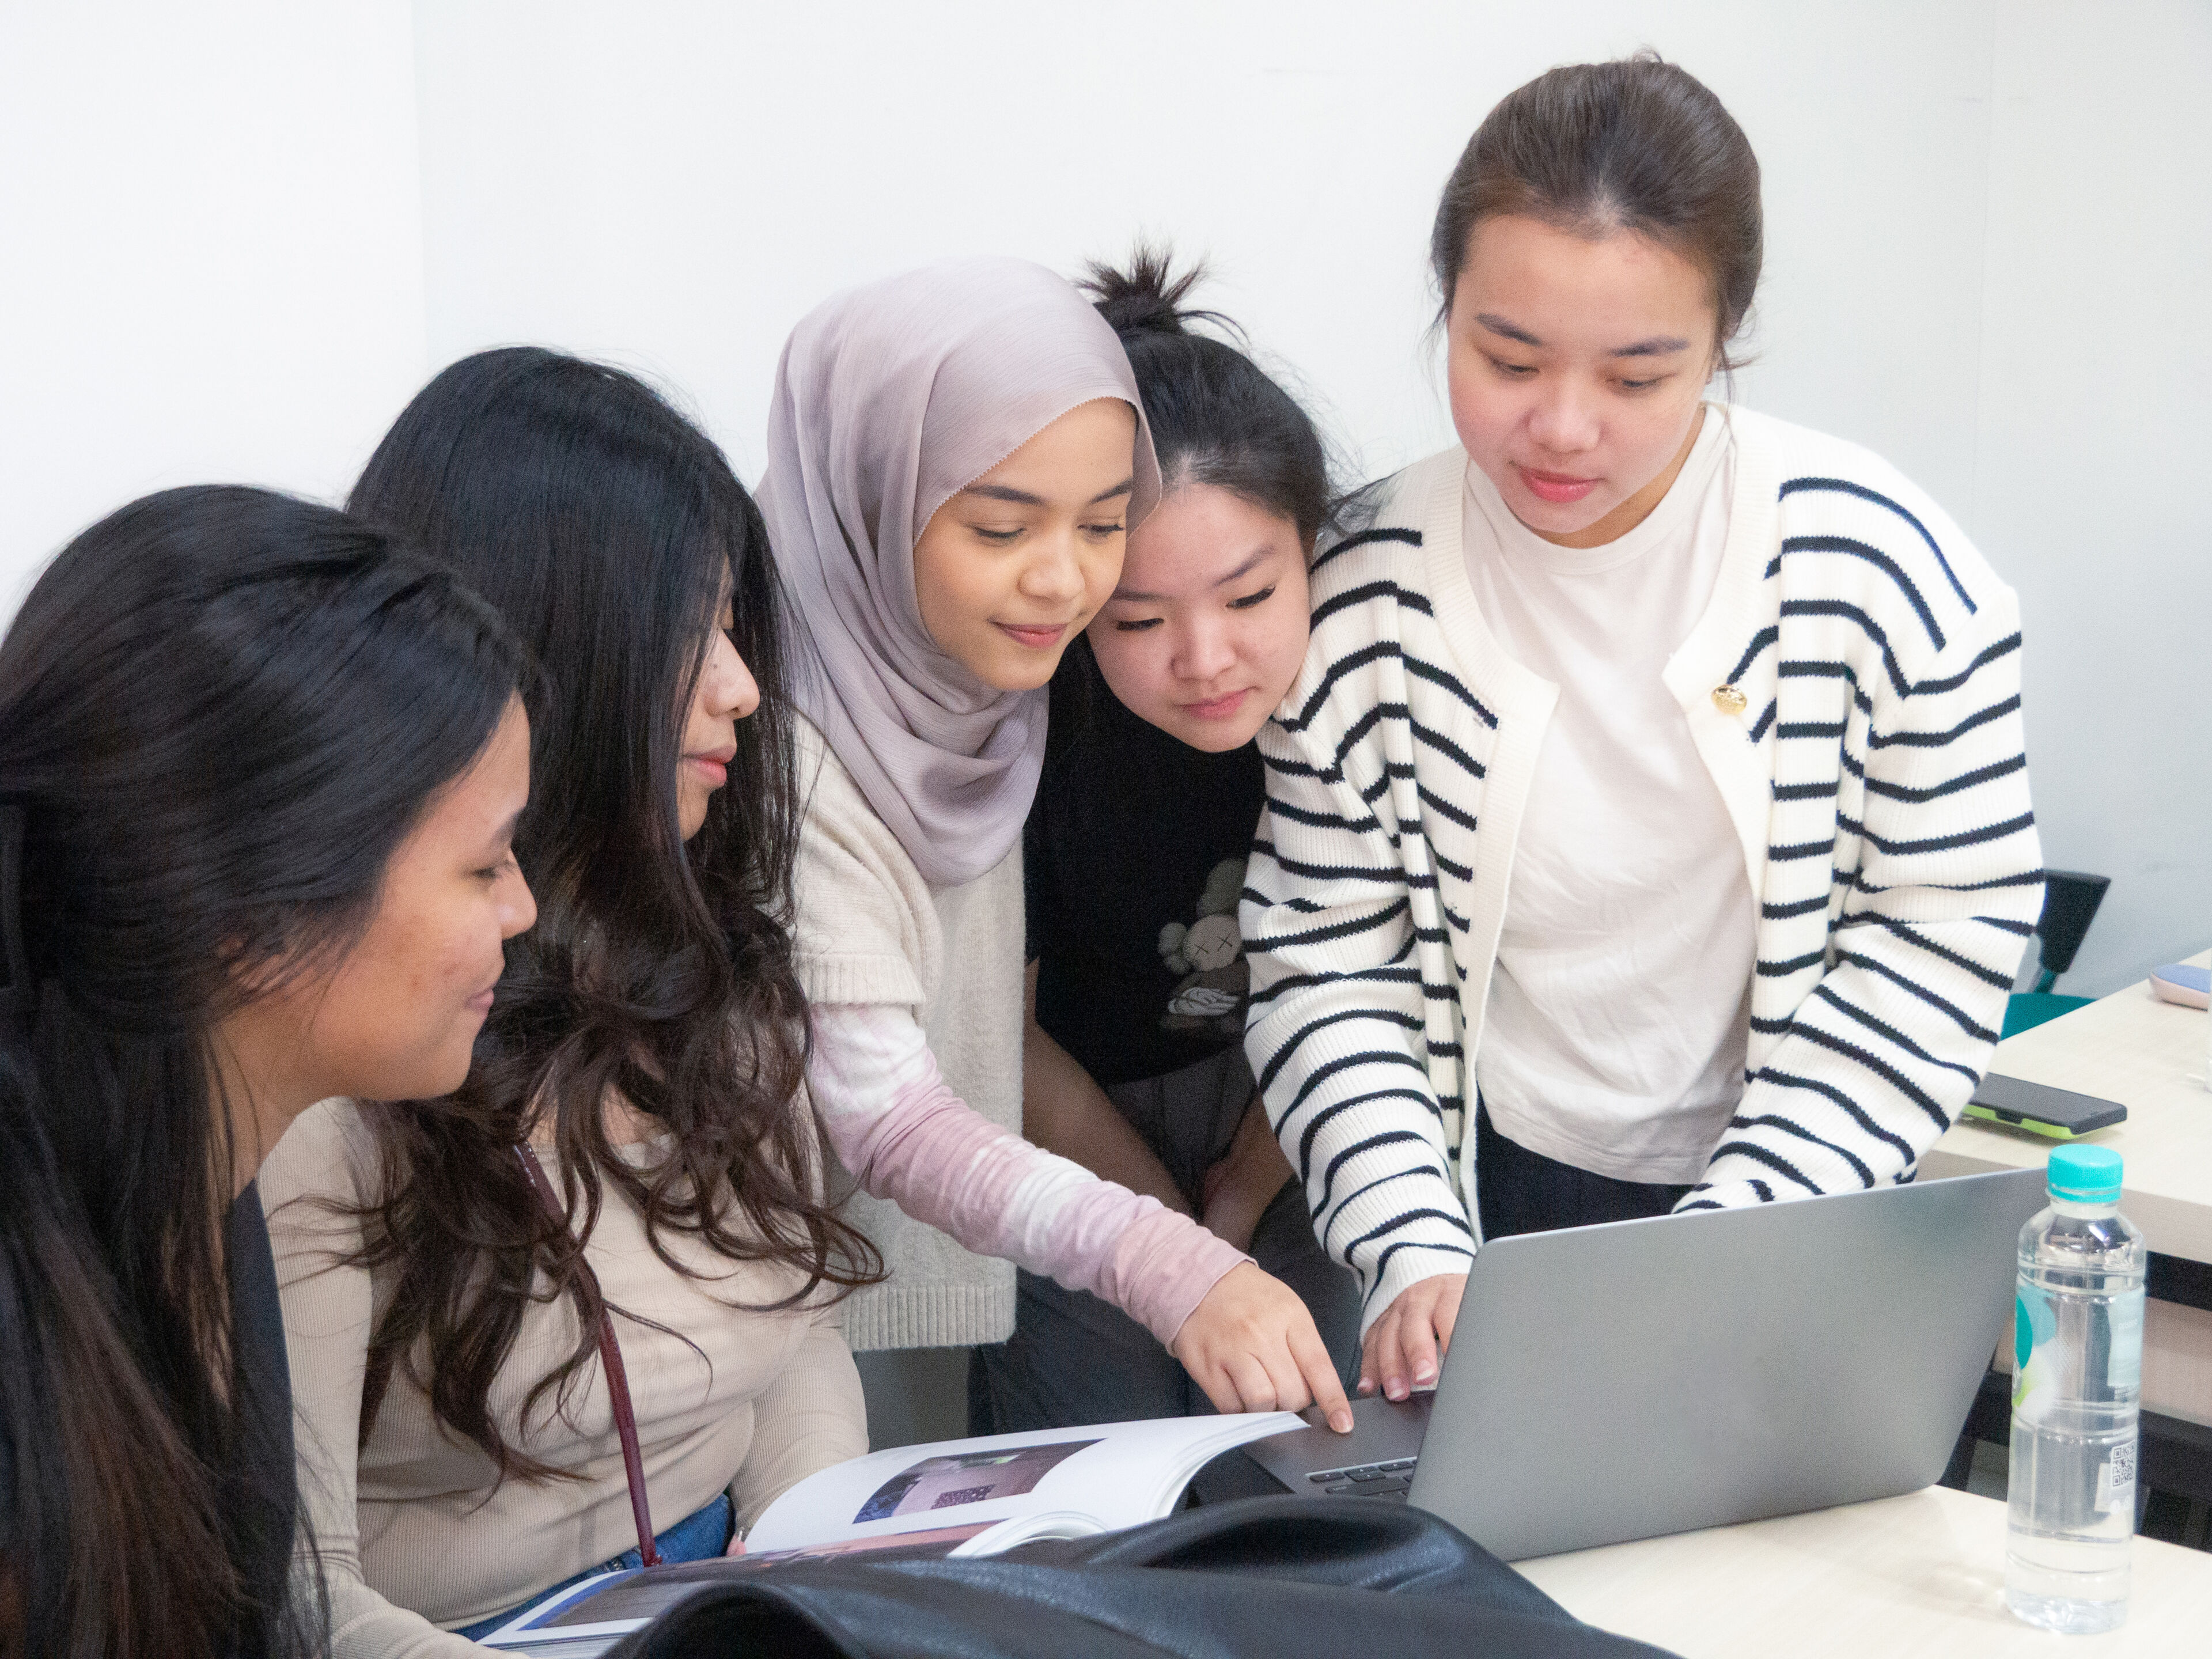 A group of five young women, including one wearing a hijab, attentively focused on a laptop screen, collaborating on a project in a classroom setting.